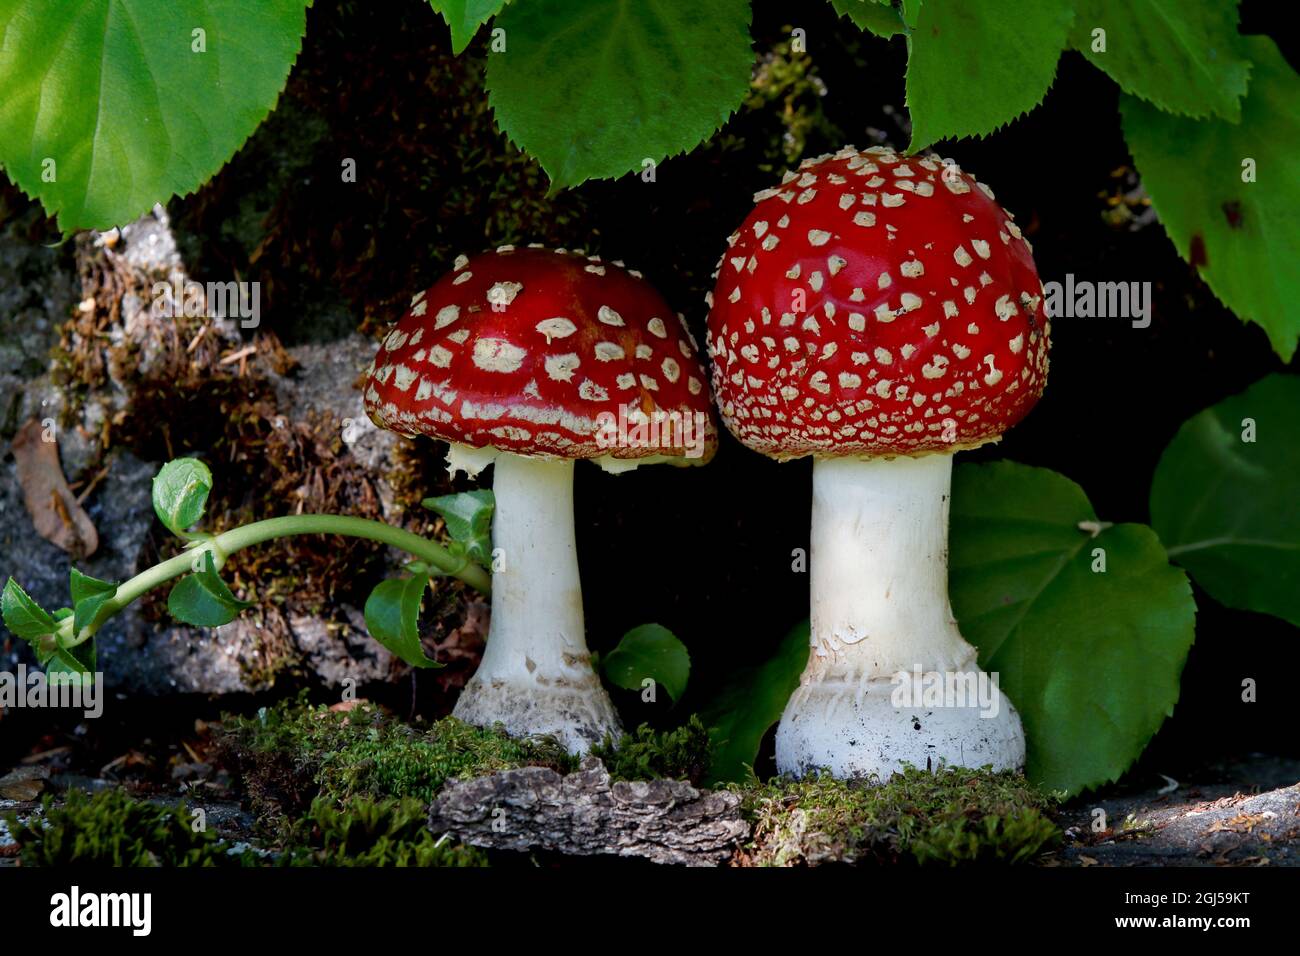 Two beautiful red fly agaric mushrooms in arrangement Stock Photo